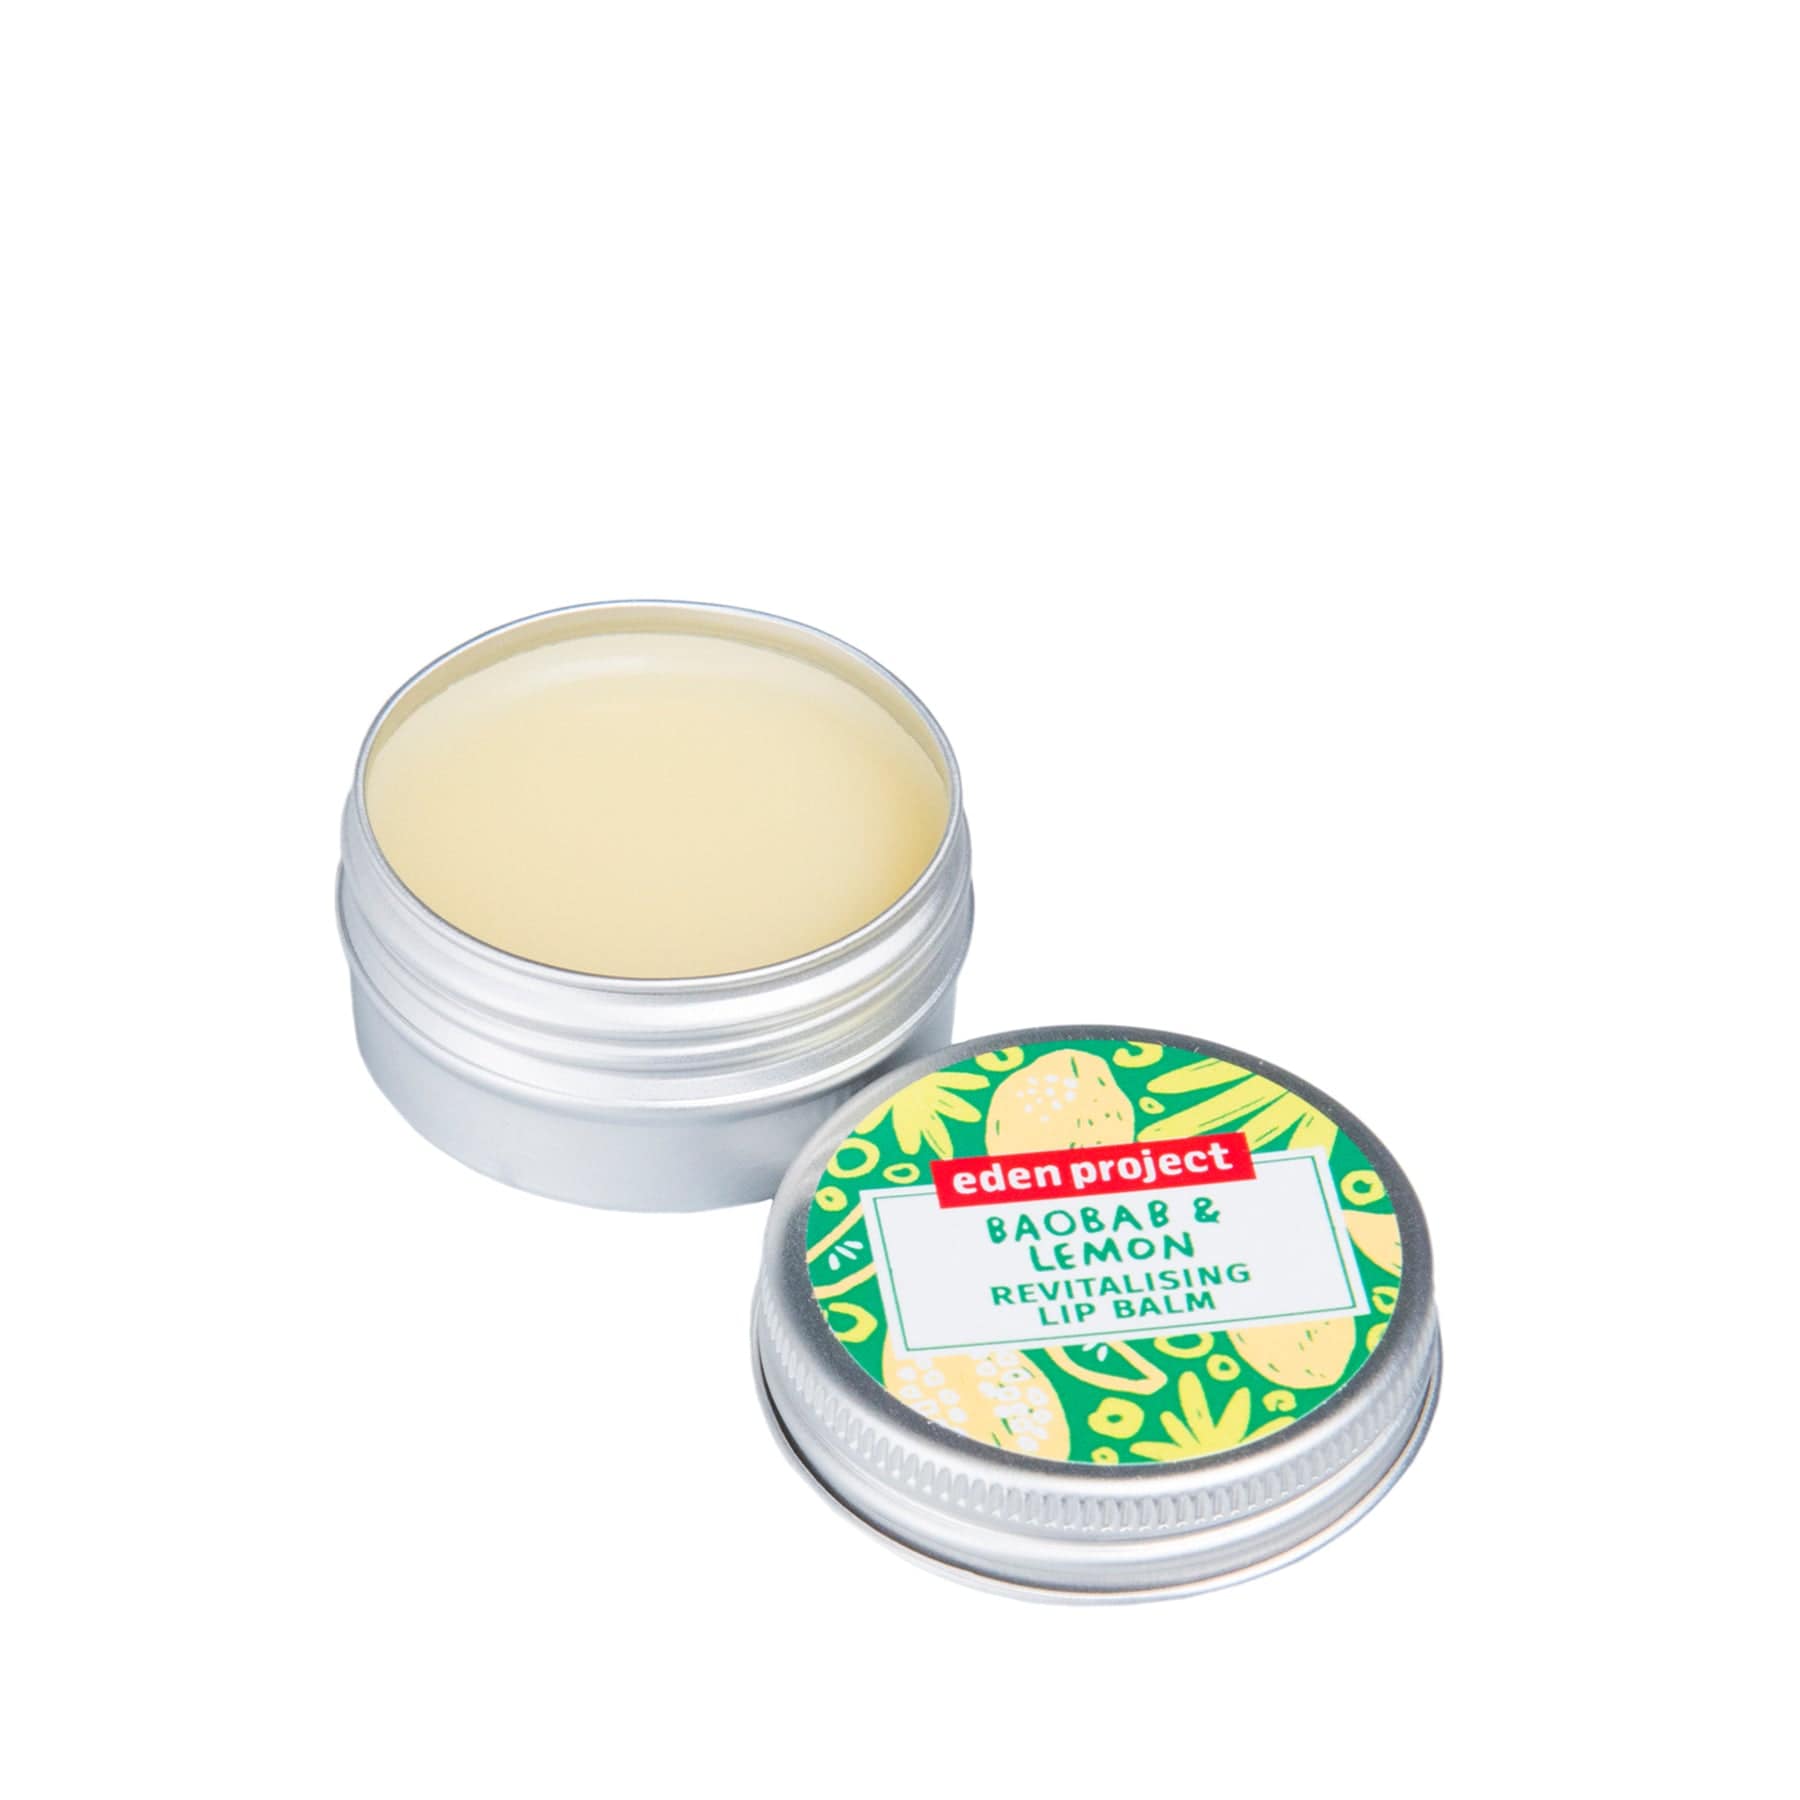 Eden Project Baobab & Lemon Revitalising Lip Balm in open tin container with solid balm and colorful, patterned lid design on white background.